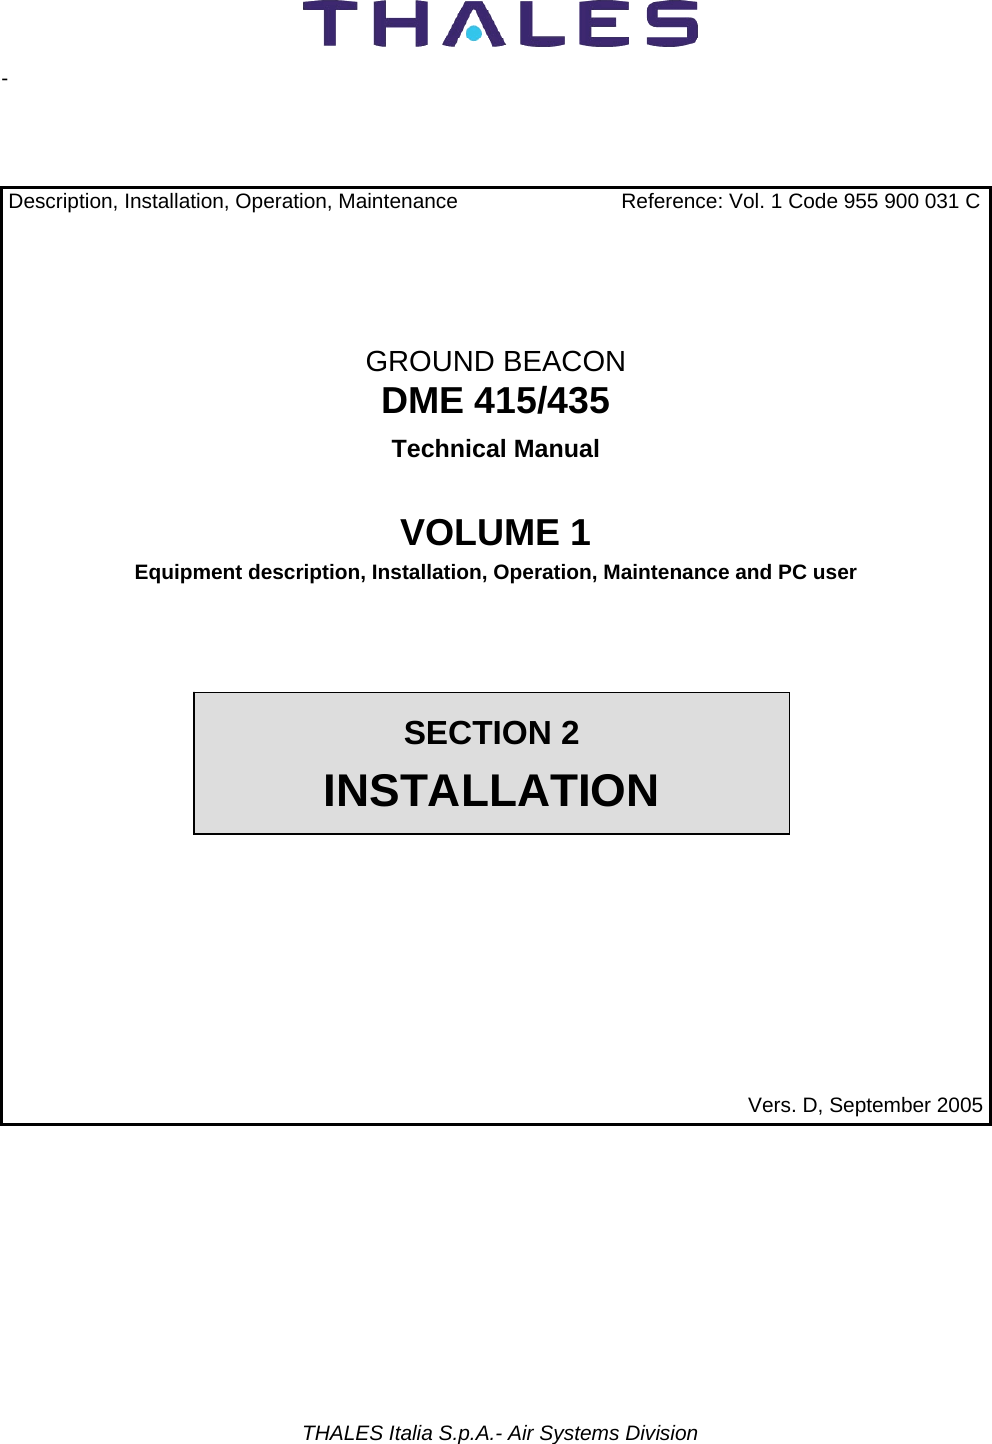           THALES Italia S.p.A.- Air Systems Division  -     Description, Installation, Operation, Maintenance  Reference: Vol. 1 Code 955 900 031 C   GROUND BEACON DME 415/435 Technical Manual  VOLUME 1 Equipment description, Installation, Operation, Maintenance and PC user  Vers. D, September 2005 SECTION 2 INSTALLATION 